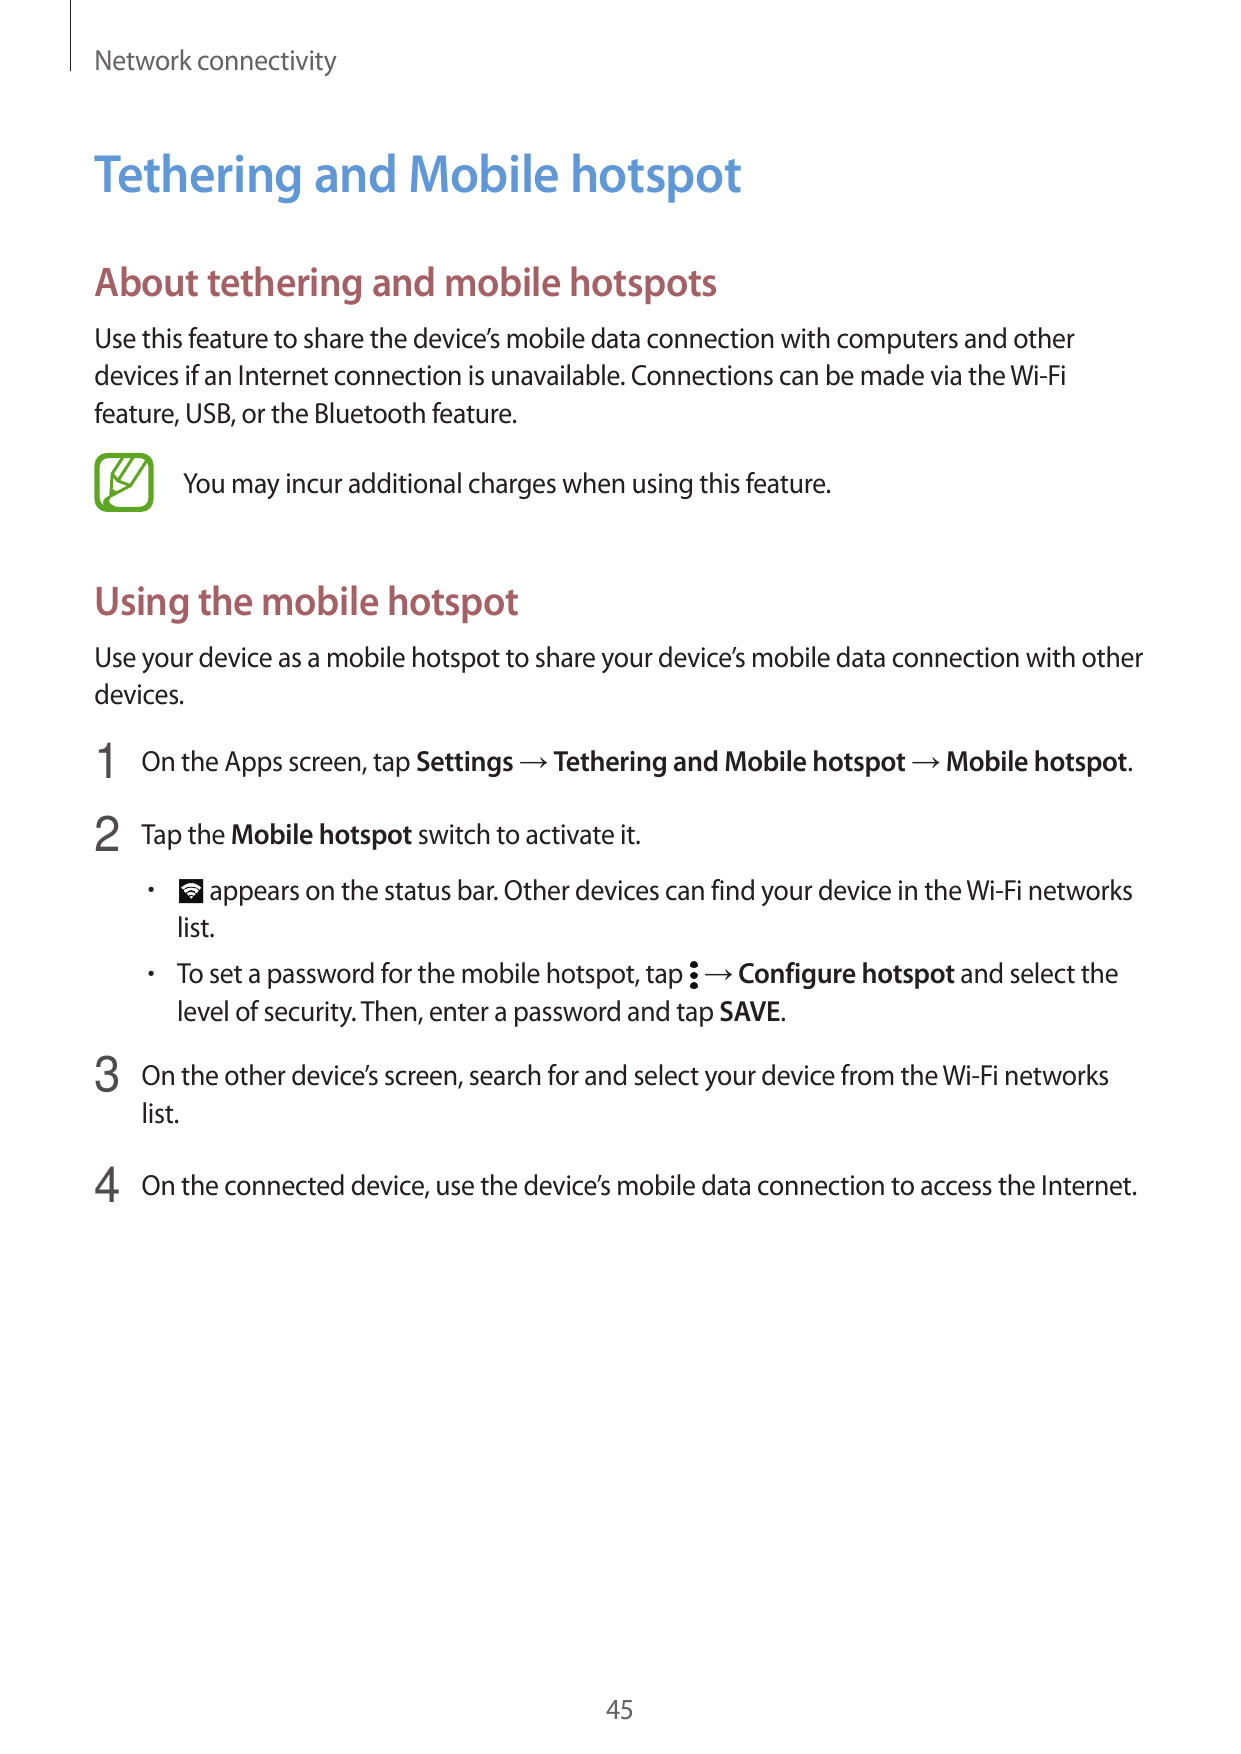 Network connectivityTethering and Mobile hotspotAbout tethering and mobile hotspotsUse this feature to share the device’s mobile